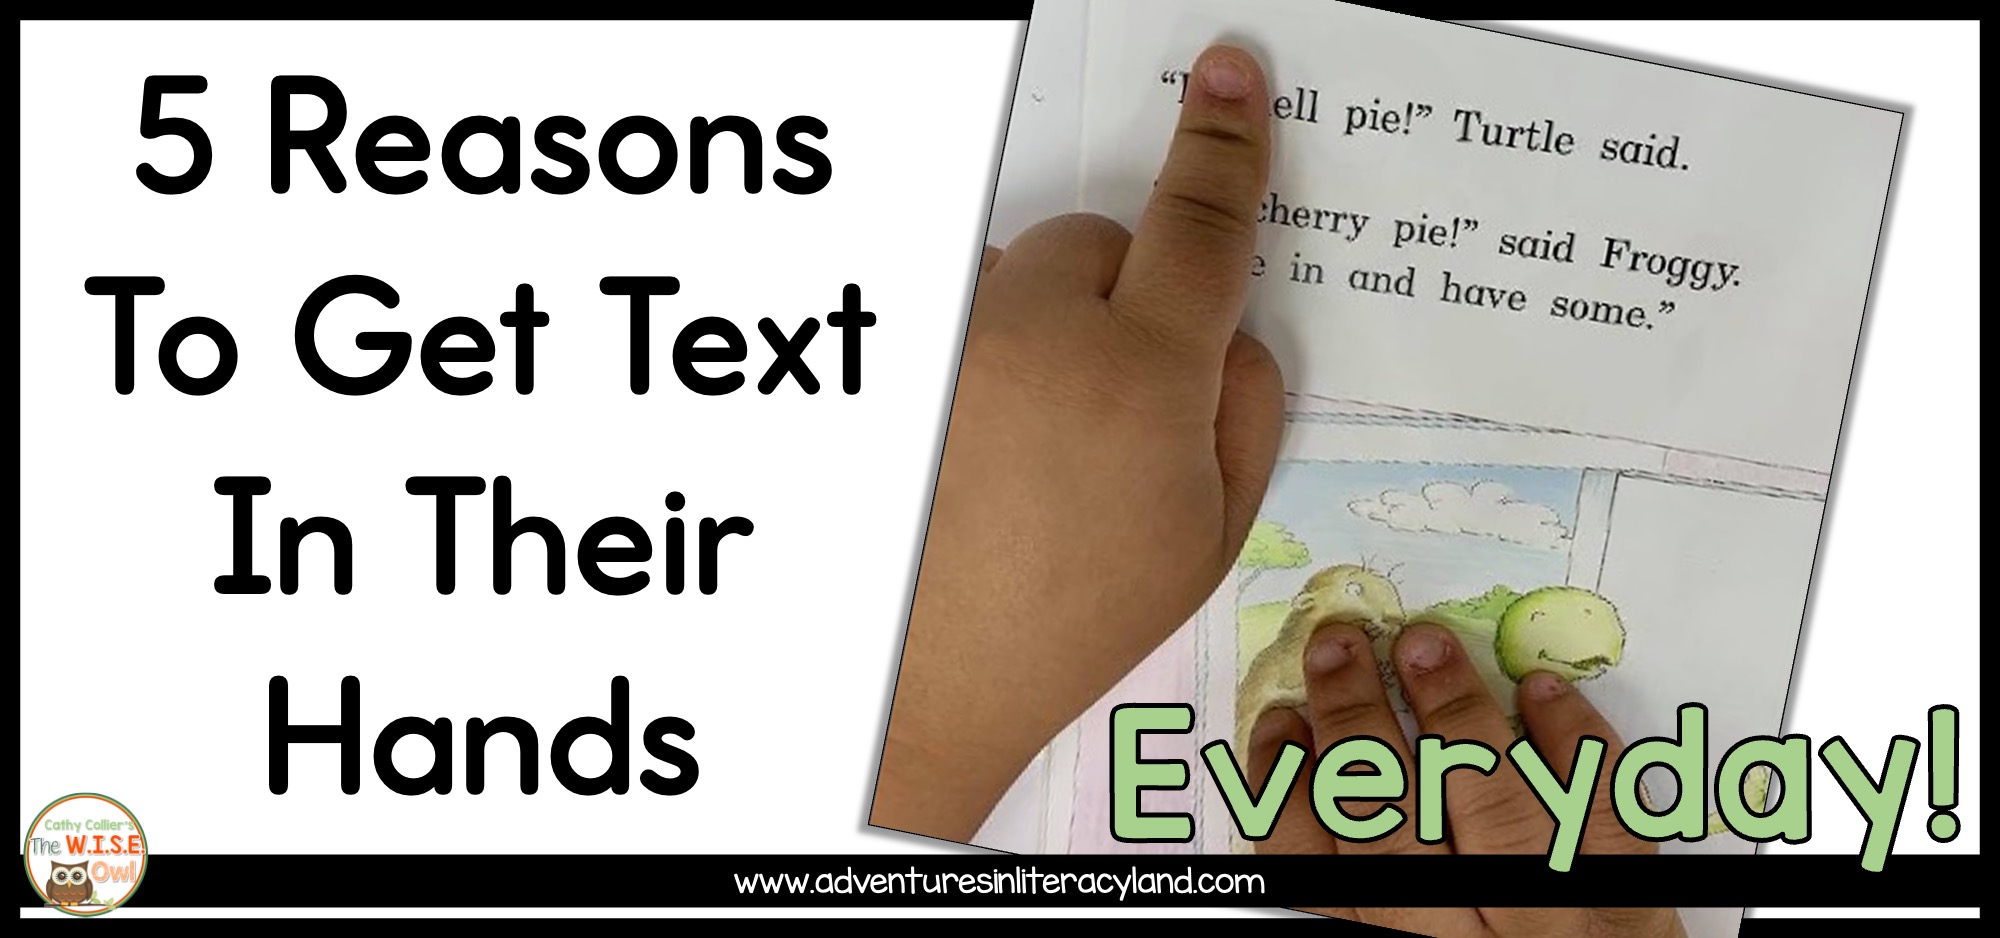 5 Reasons to Text in their Hands...EVERYDAY!